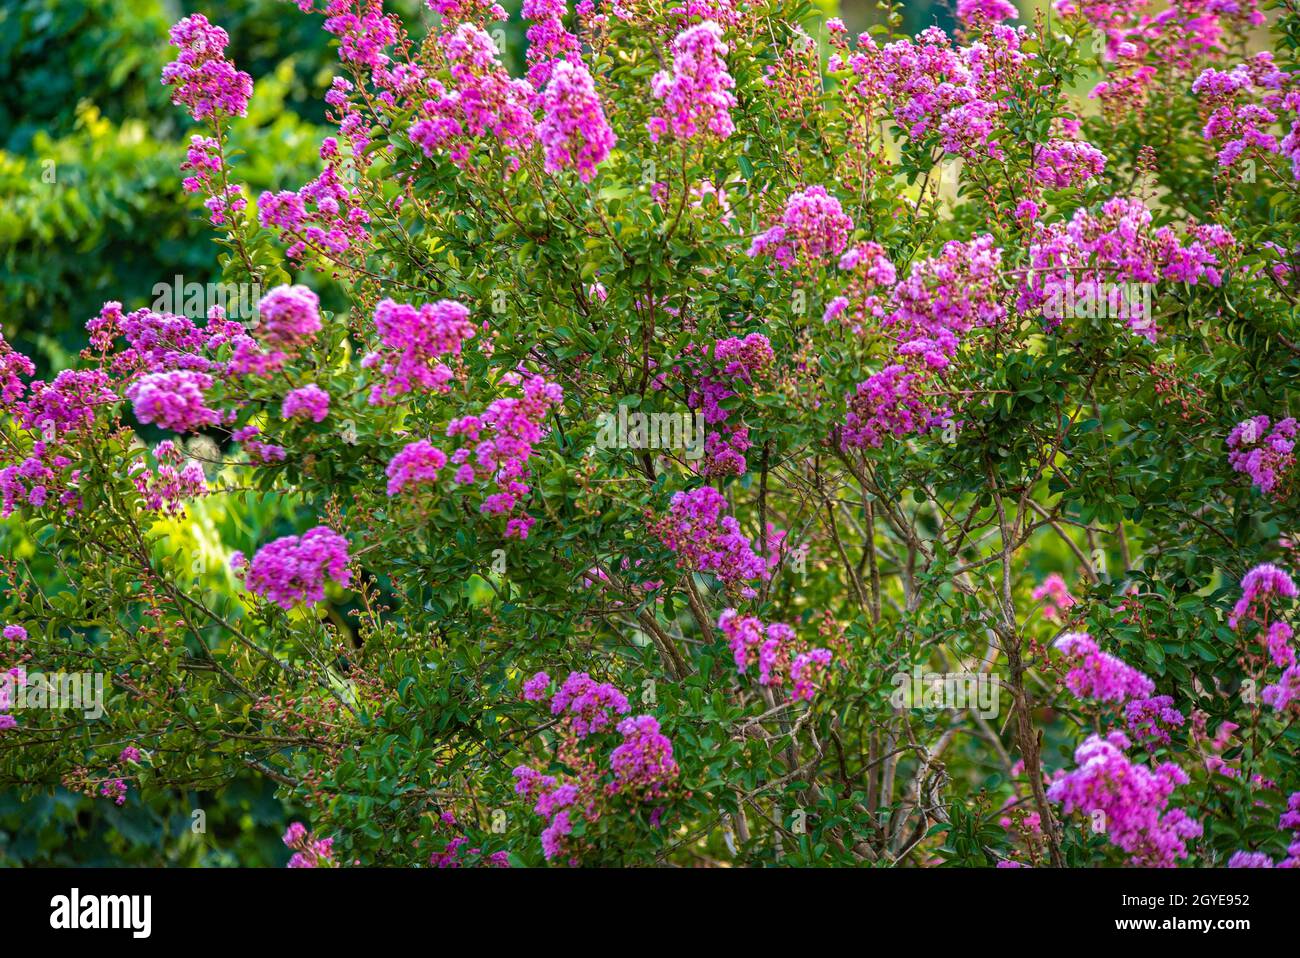 Detail of Lagerstroemia plant in flowering at sunset Stock Photo